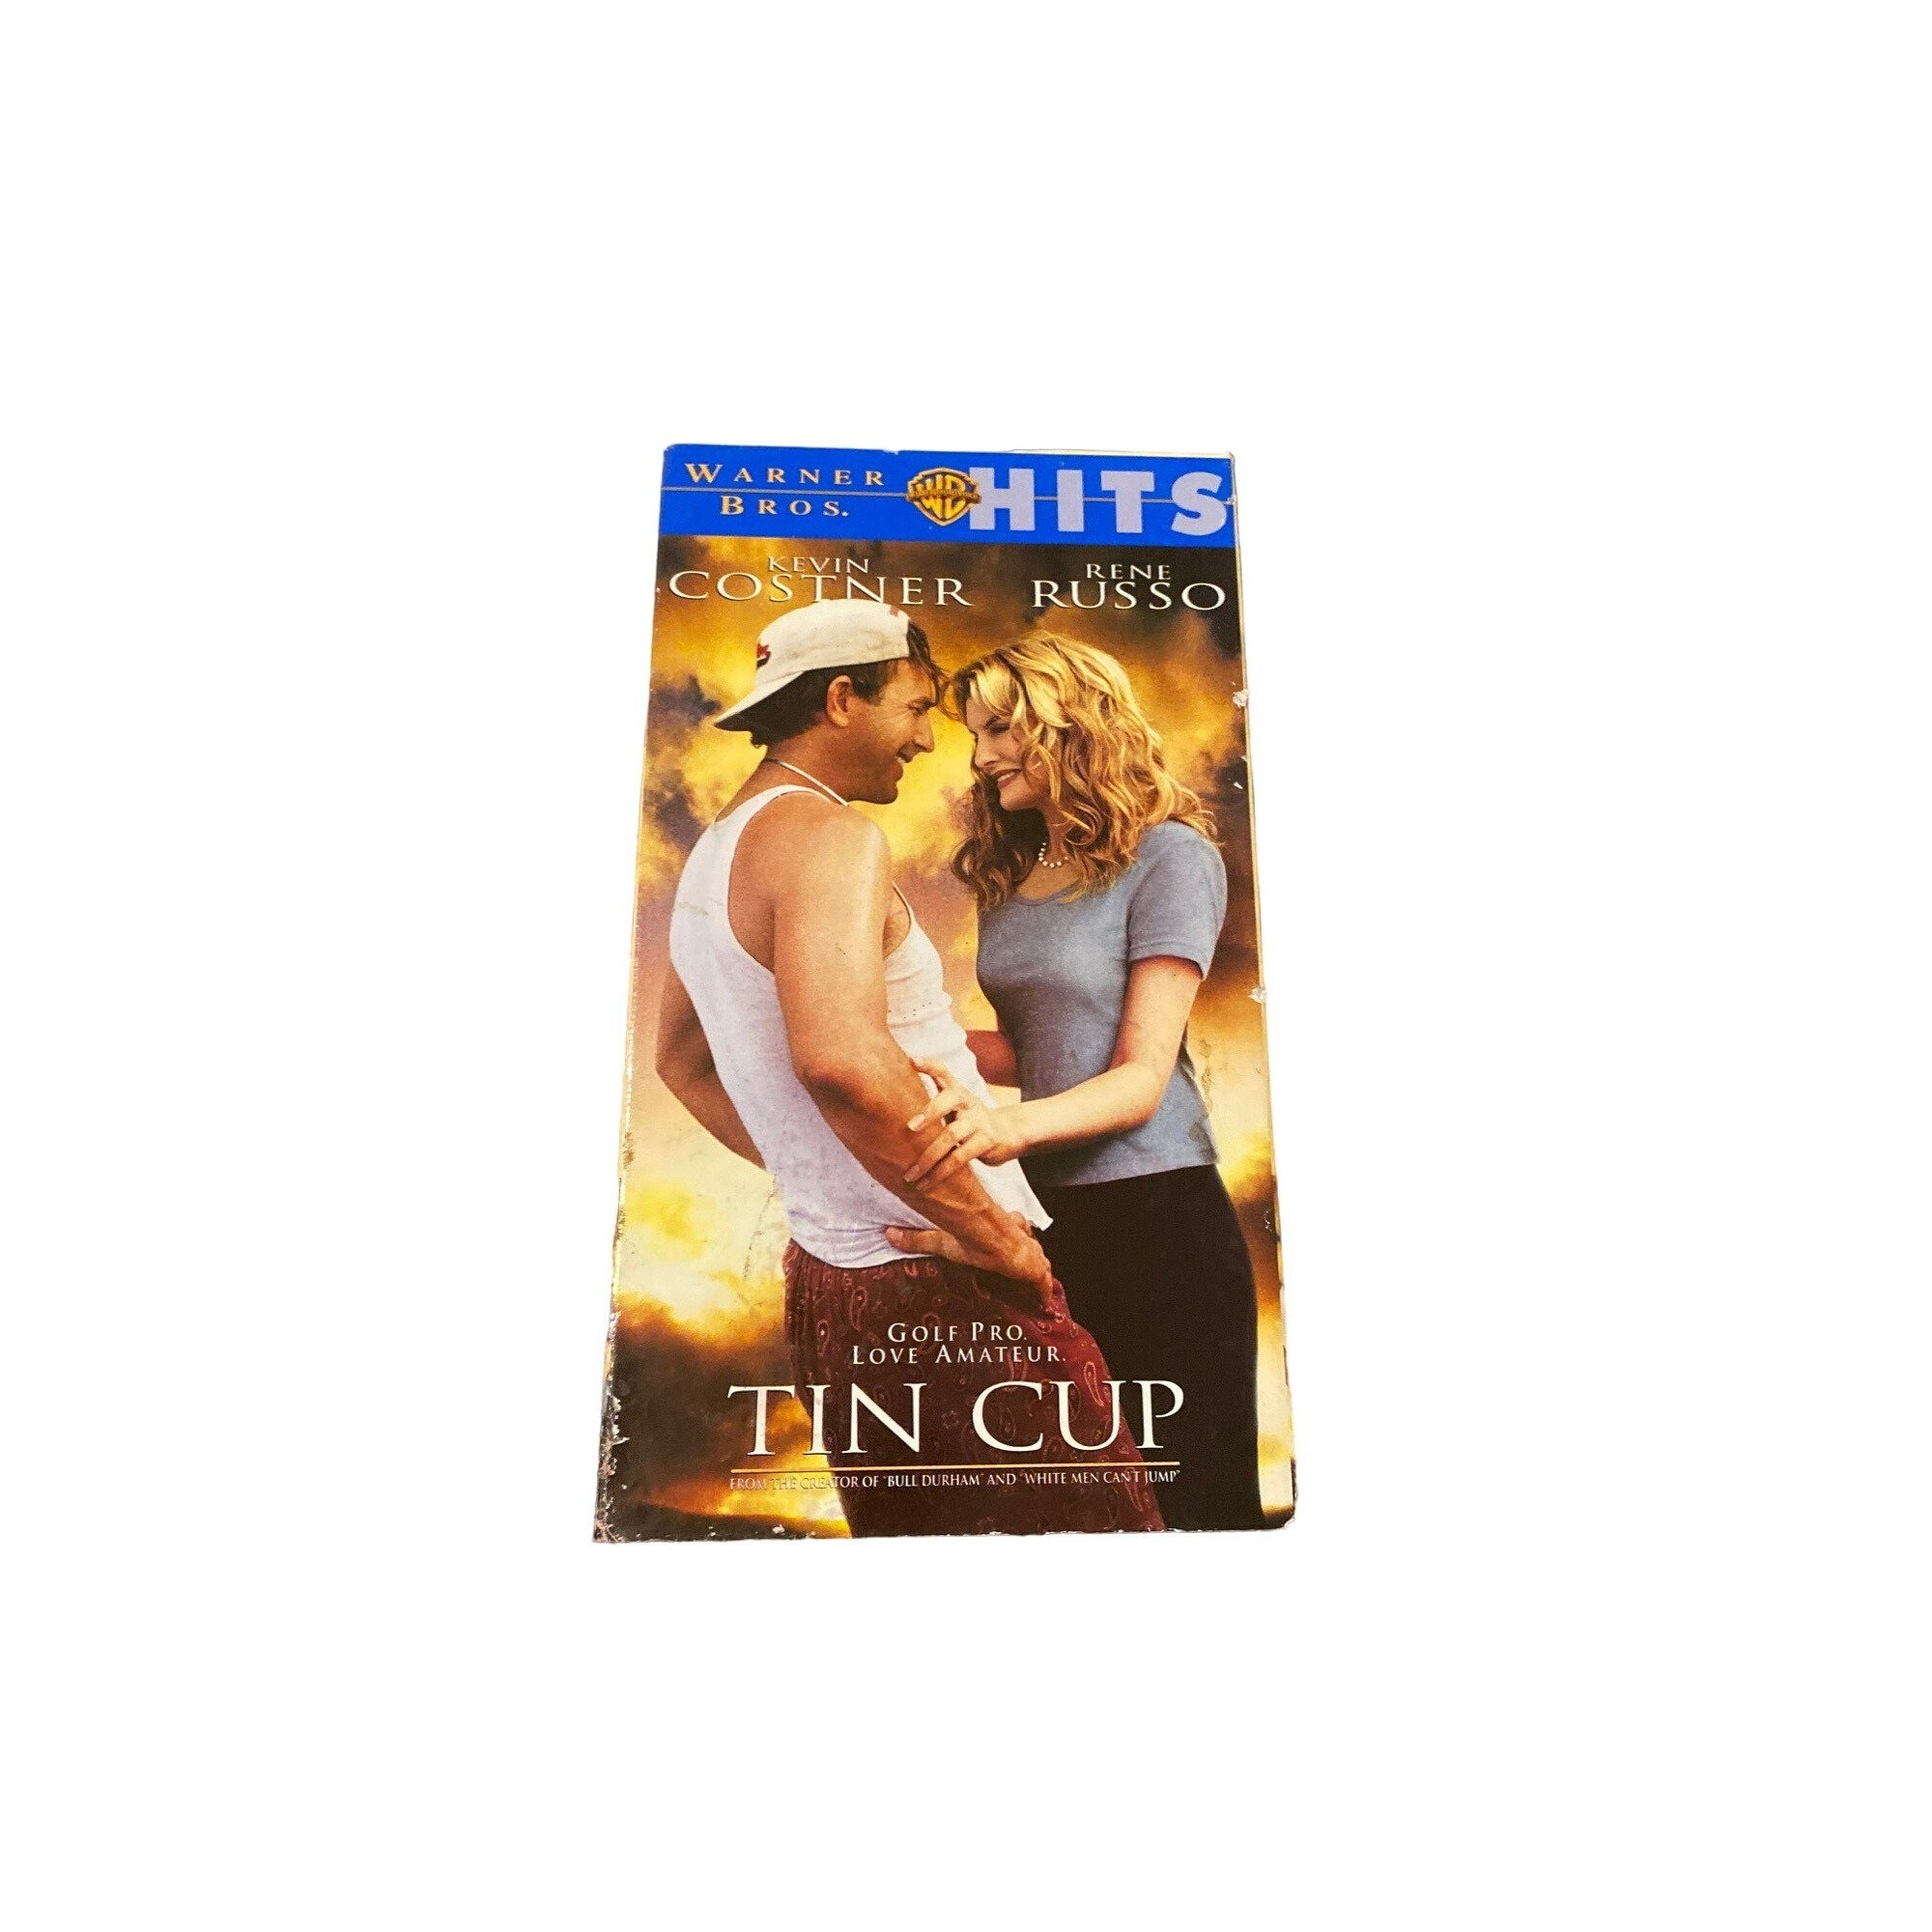 Vintage Tin Cup VHS Tape Movie image